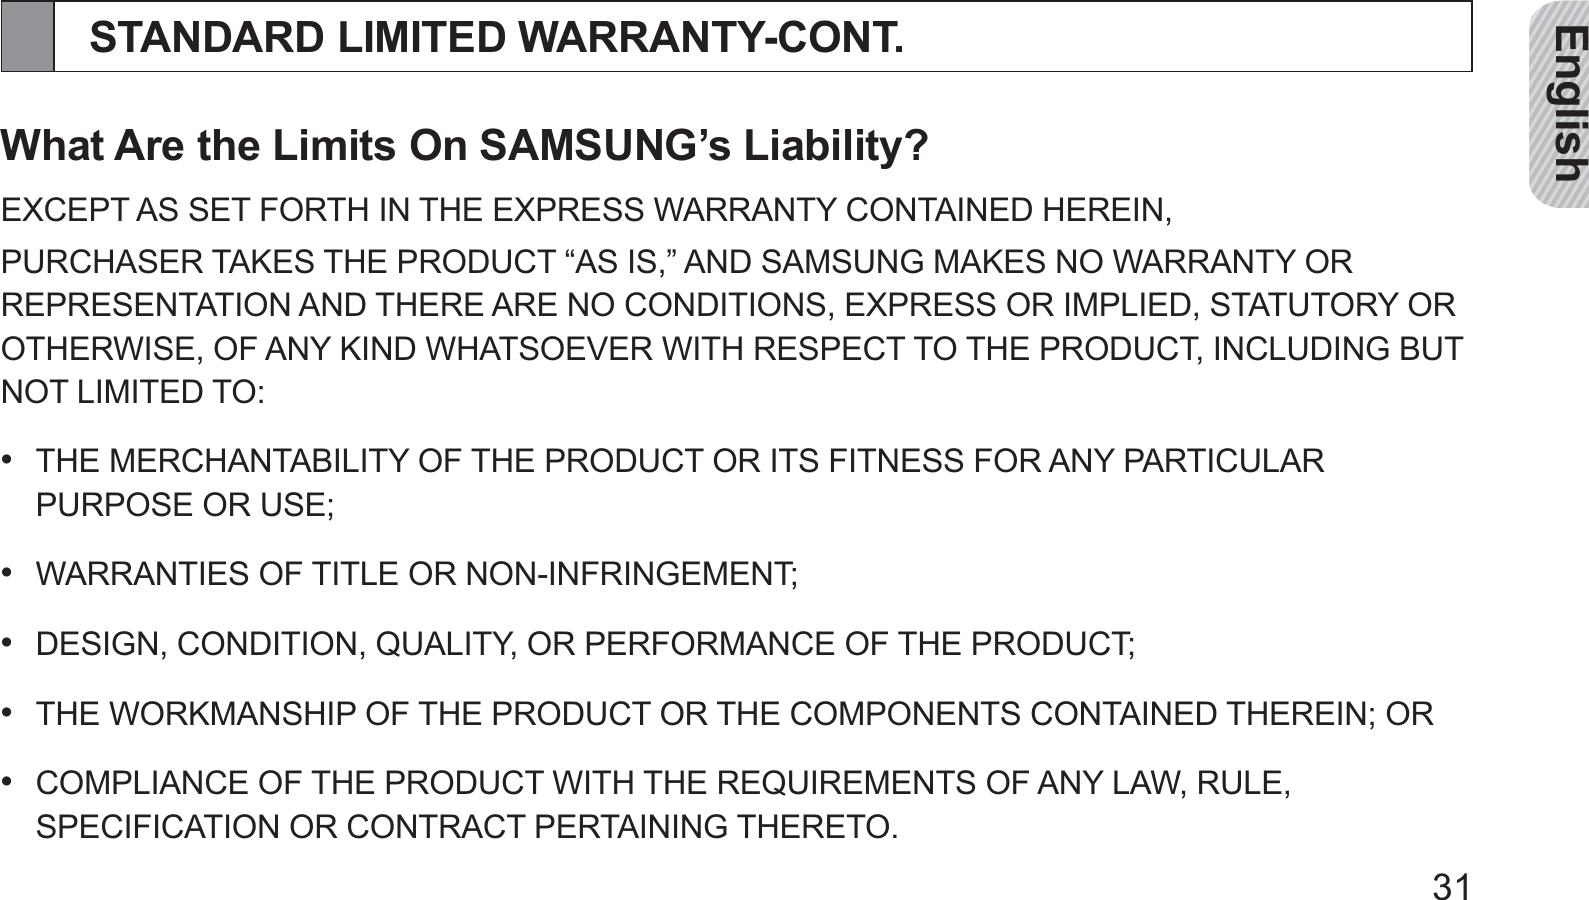 English31STANDARD LIMITED WARRANTY-CONT.What Are the Limits On SAMSUNG’s Liability?EXCEPT AS SET FORTH IN THE EXPRESS WARRANTY CONTAINED HEREIN,PURCHASER TAKES THE PRODUCT “AS IS,” AND SAMSUNG MAKES NO WARRANTY OR REPRESENTATION AND THERE ARE NO CONDITIONS, EXPRESS OR IMPLIED, STATUTORY OR OTHERWISE, OF ANY KIND WHATSOEVER WITH RESPECT TO THE PRODUCT, INCLUDING BUT NOT LIMITED TO:THE MERCHANTABILITY OF THE PRODUCT OR ITS FITNESS FOR ANY PARTICULAR • PURPOSE OR USE;  WARRANTIES OF TITLE OR NON-INFRINGEMENT;• DESIGN, CONDITION, QUALITY, OR PERFORMANCE OF THE PRODUCT;• THE WORKMANSHIP OF THE PRODUCT OR THE COMPONENTS CONTAINED THEREIN; OR• COMPLIANCE OF THE PRODUCT WITH THE REQUIREMENTS OF ANY LAW, RULE, • SPECIFICATION OR CONTRACT PERTAINING THERETO.